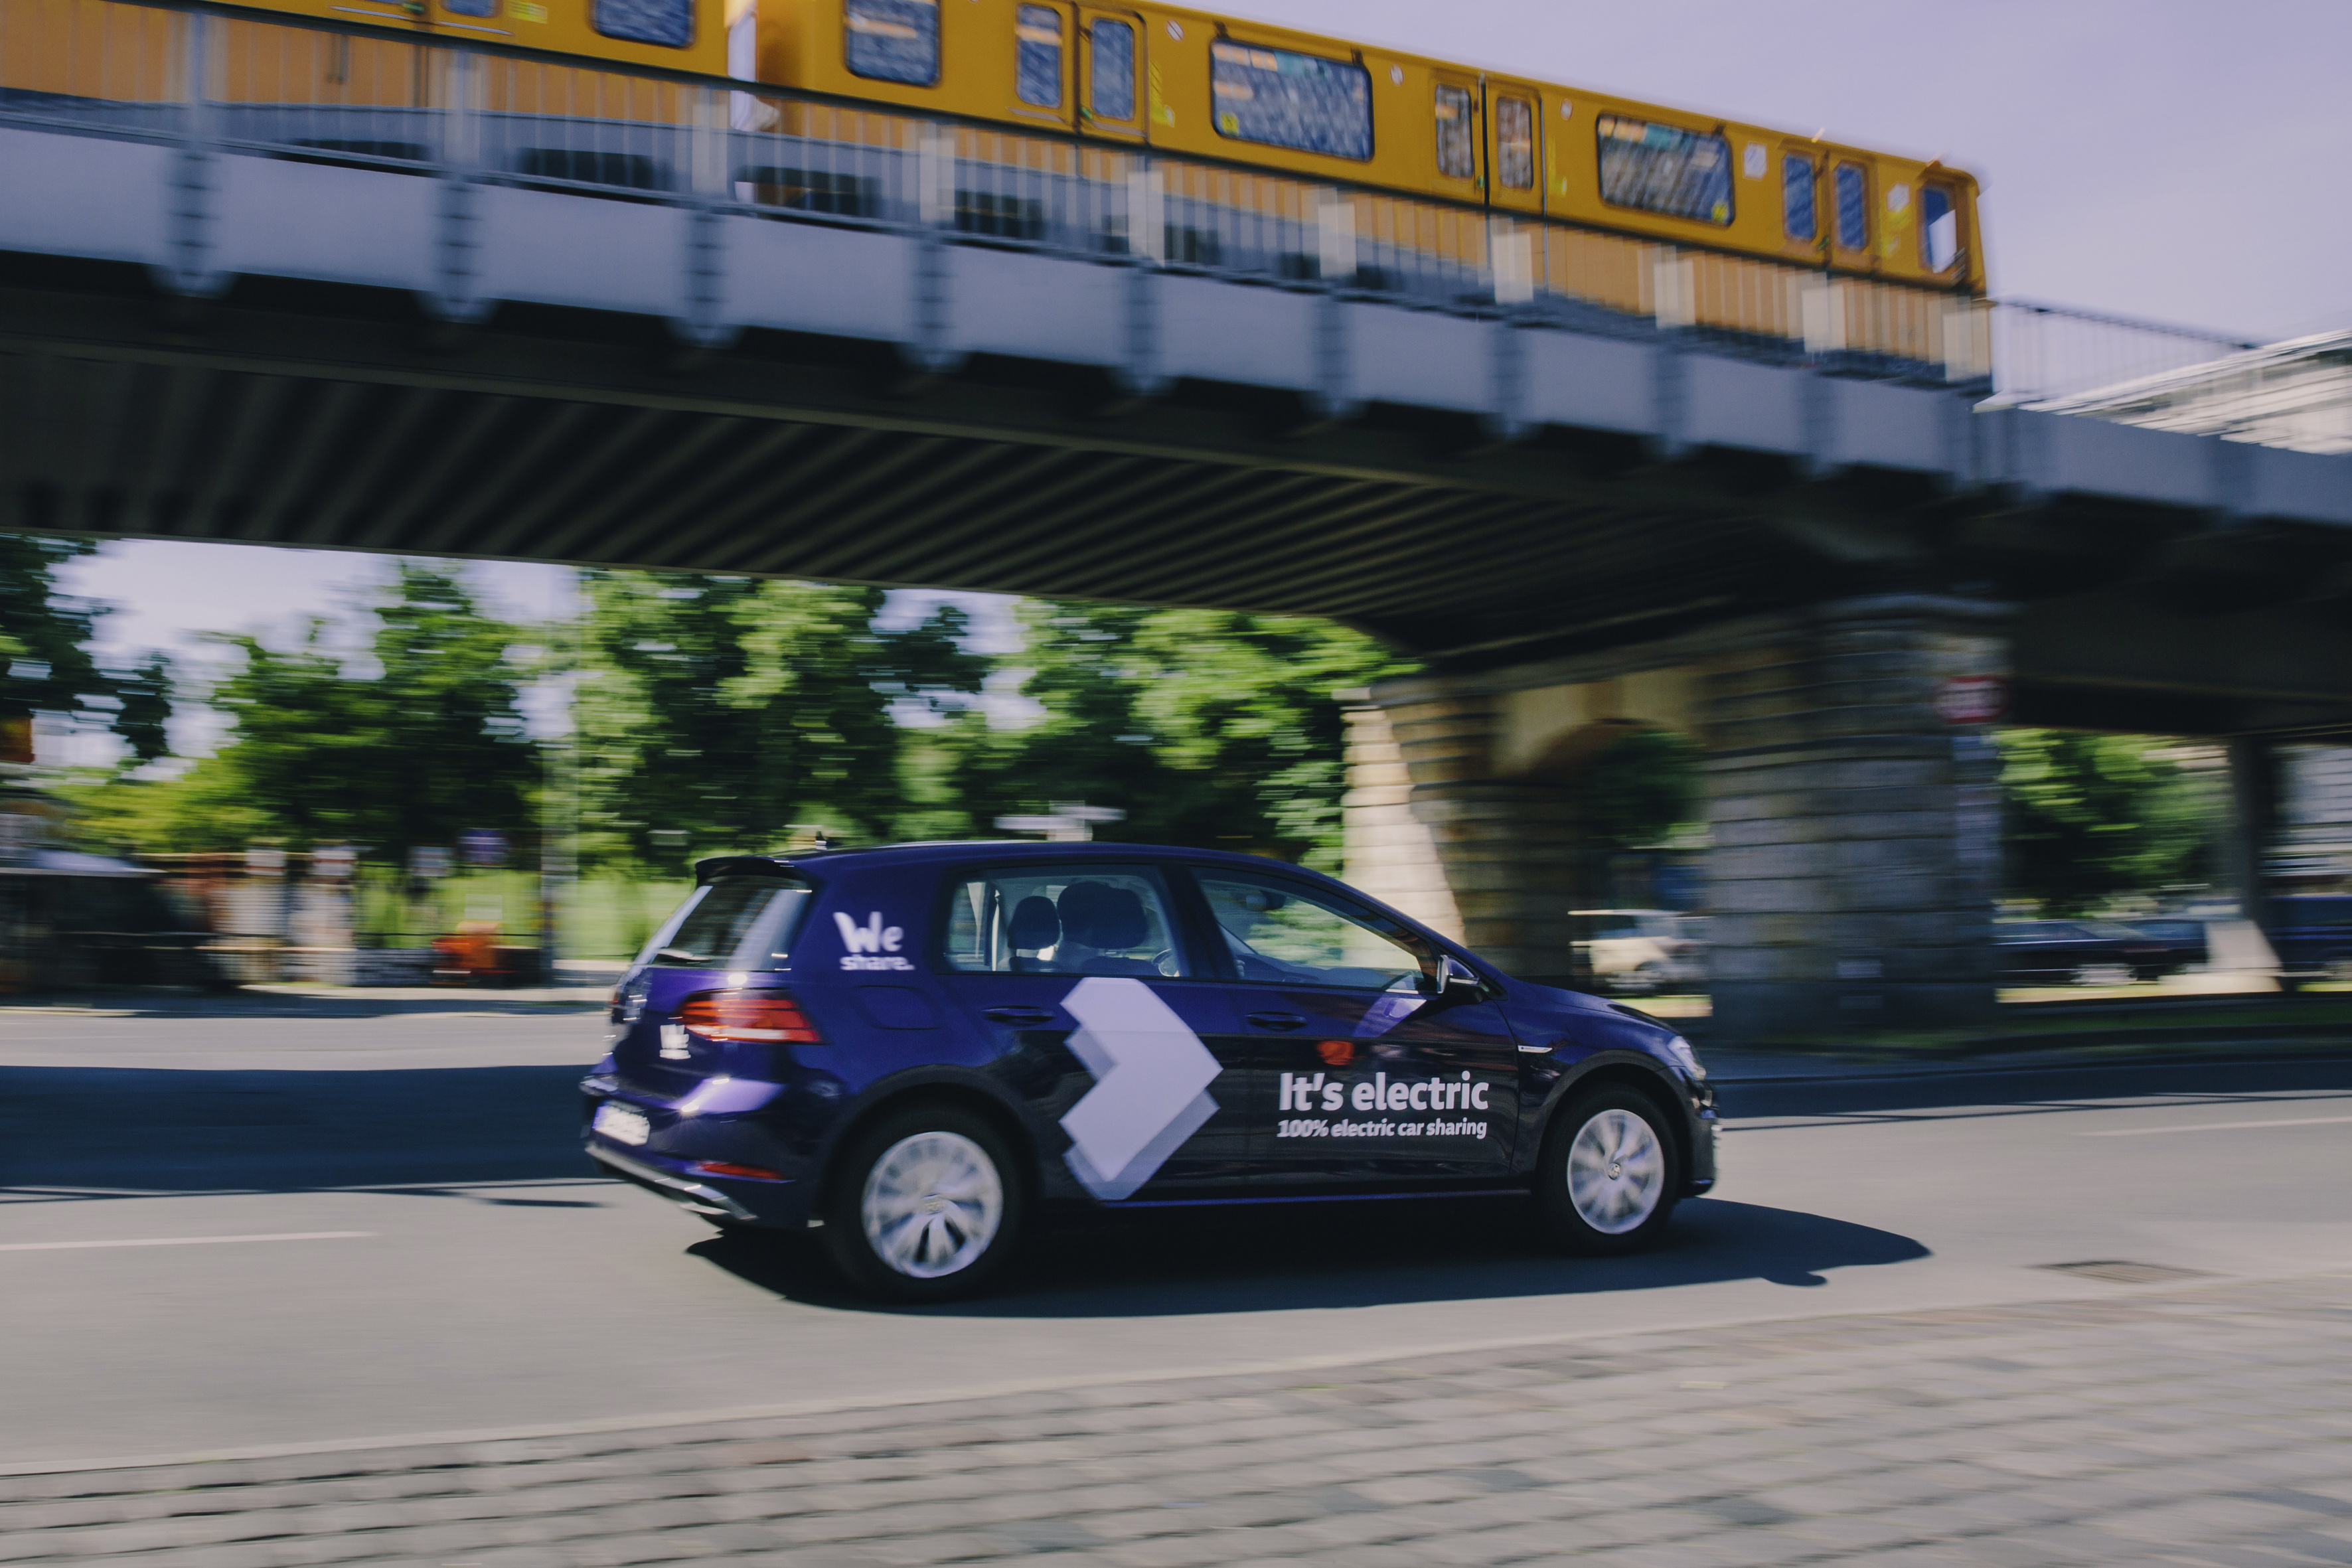 WeShare is starting in Berlin with a full-electric fleet of 1,500 e-Golf-vehicles.